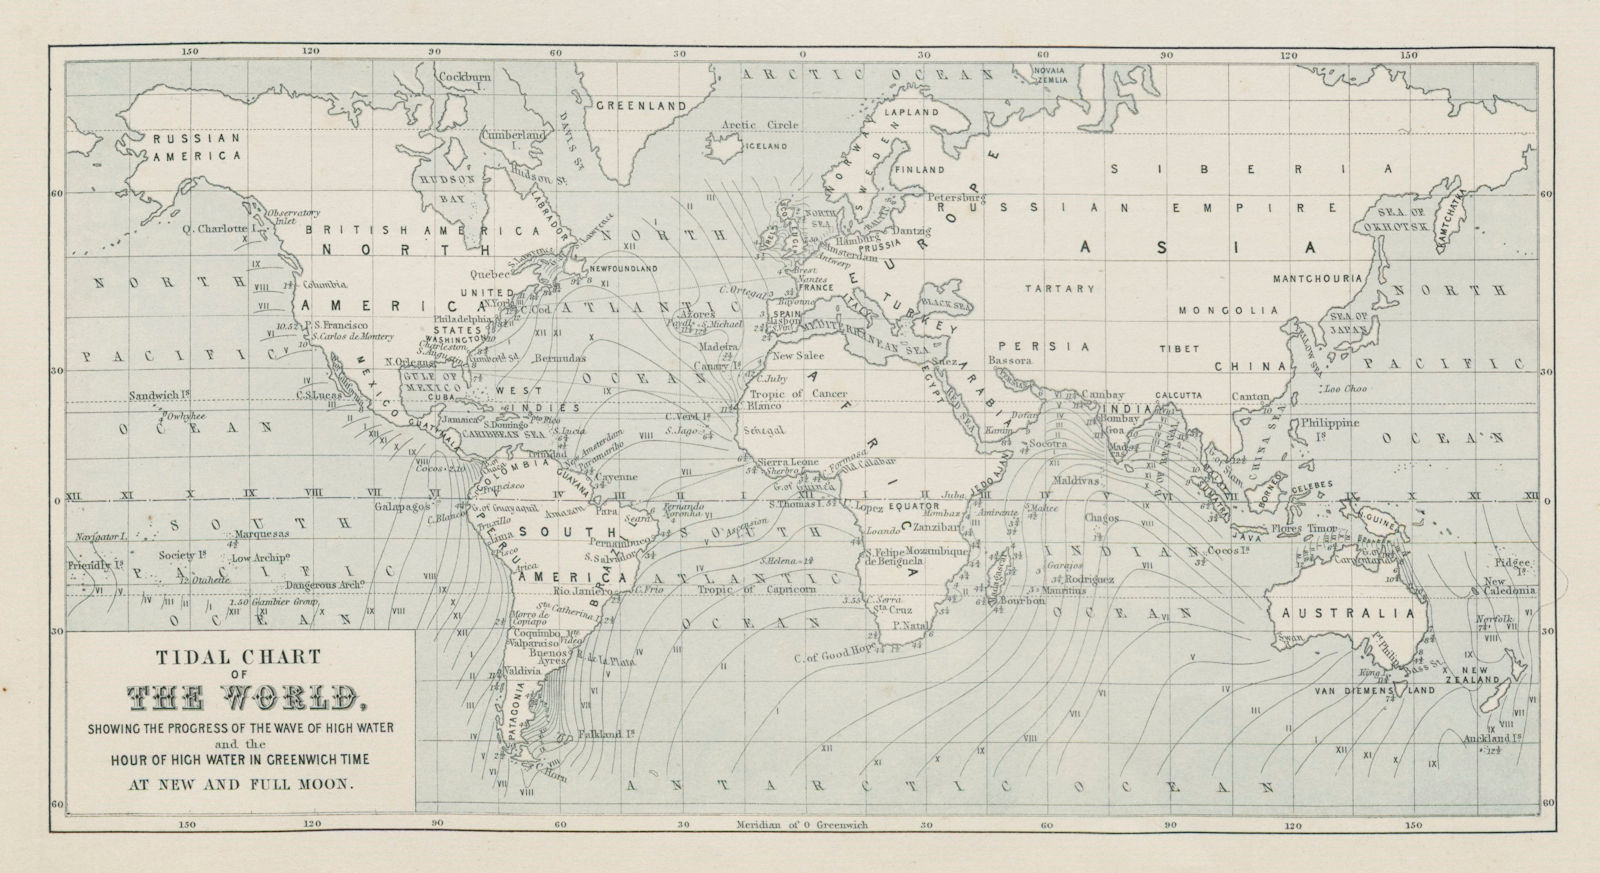 World Tidal Chart. High Water wave & time at New & Full Moon GMT. Tides 1856 map